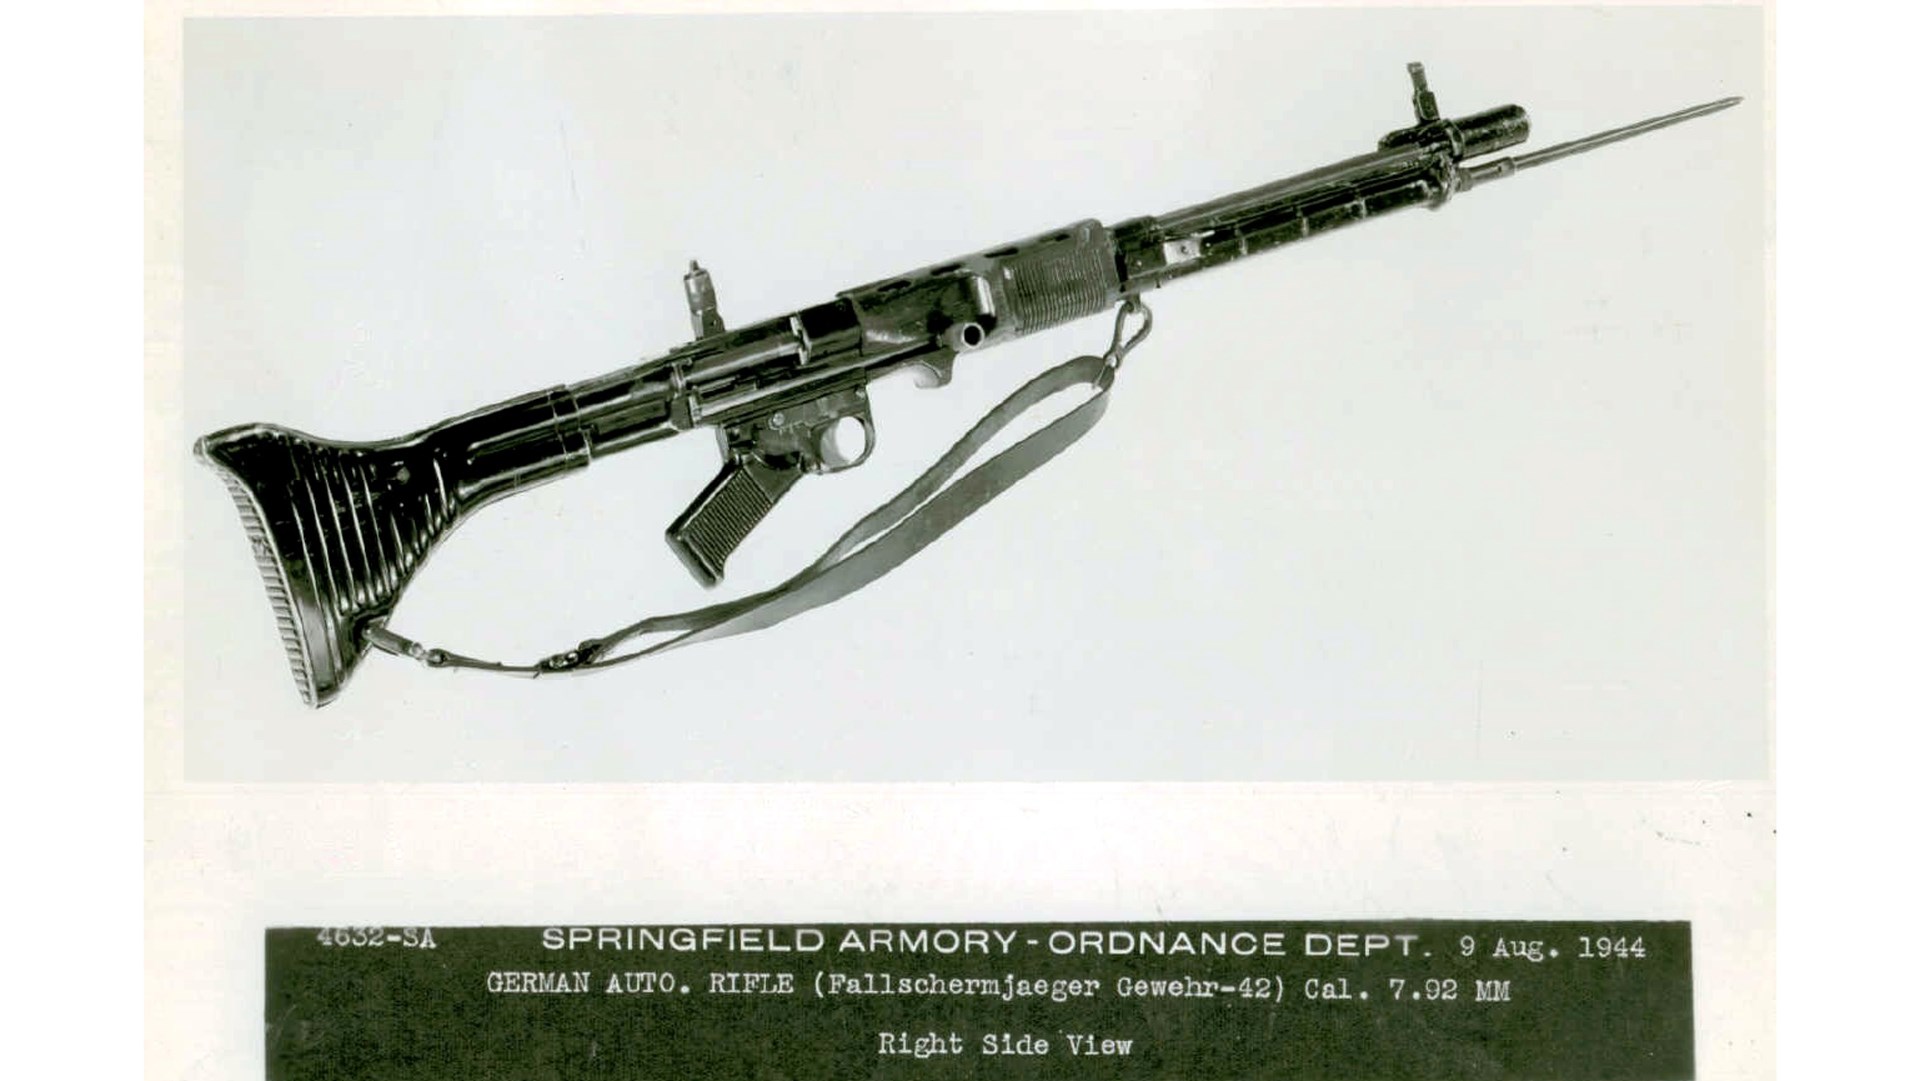 US Ordnance considered the FG42 to be the most desirable of the late-war German “assault rifles”, and the weapon had significant influence on postwar US designs. Springfield Armory